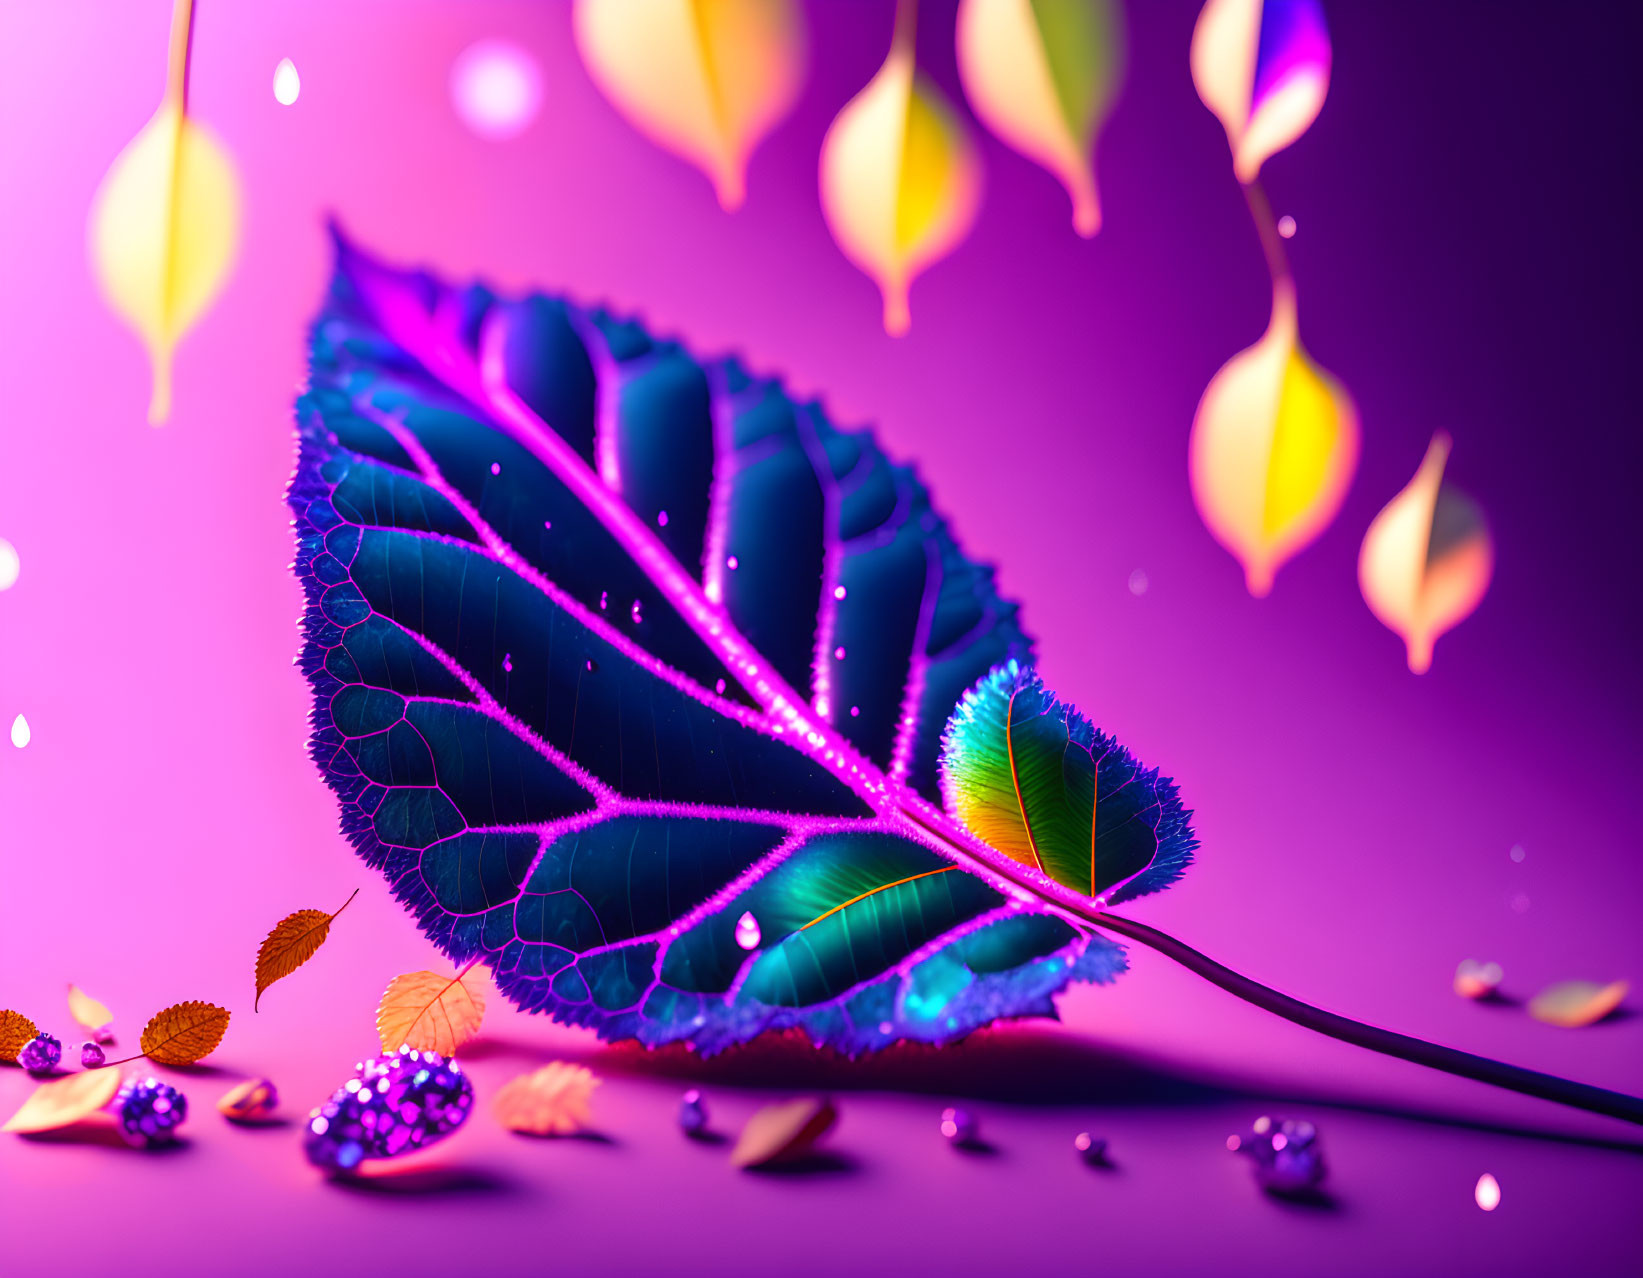 Neon-lit leaf with droplets on purple background